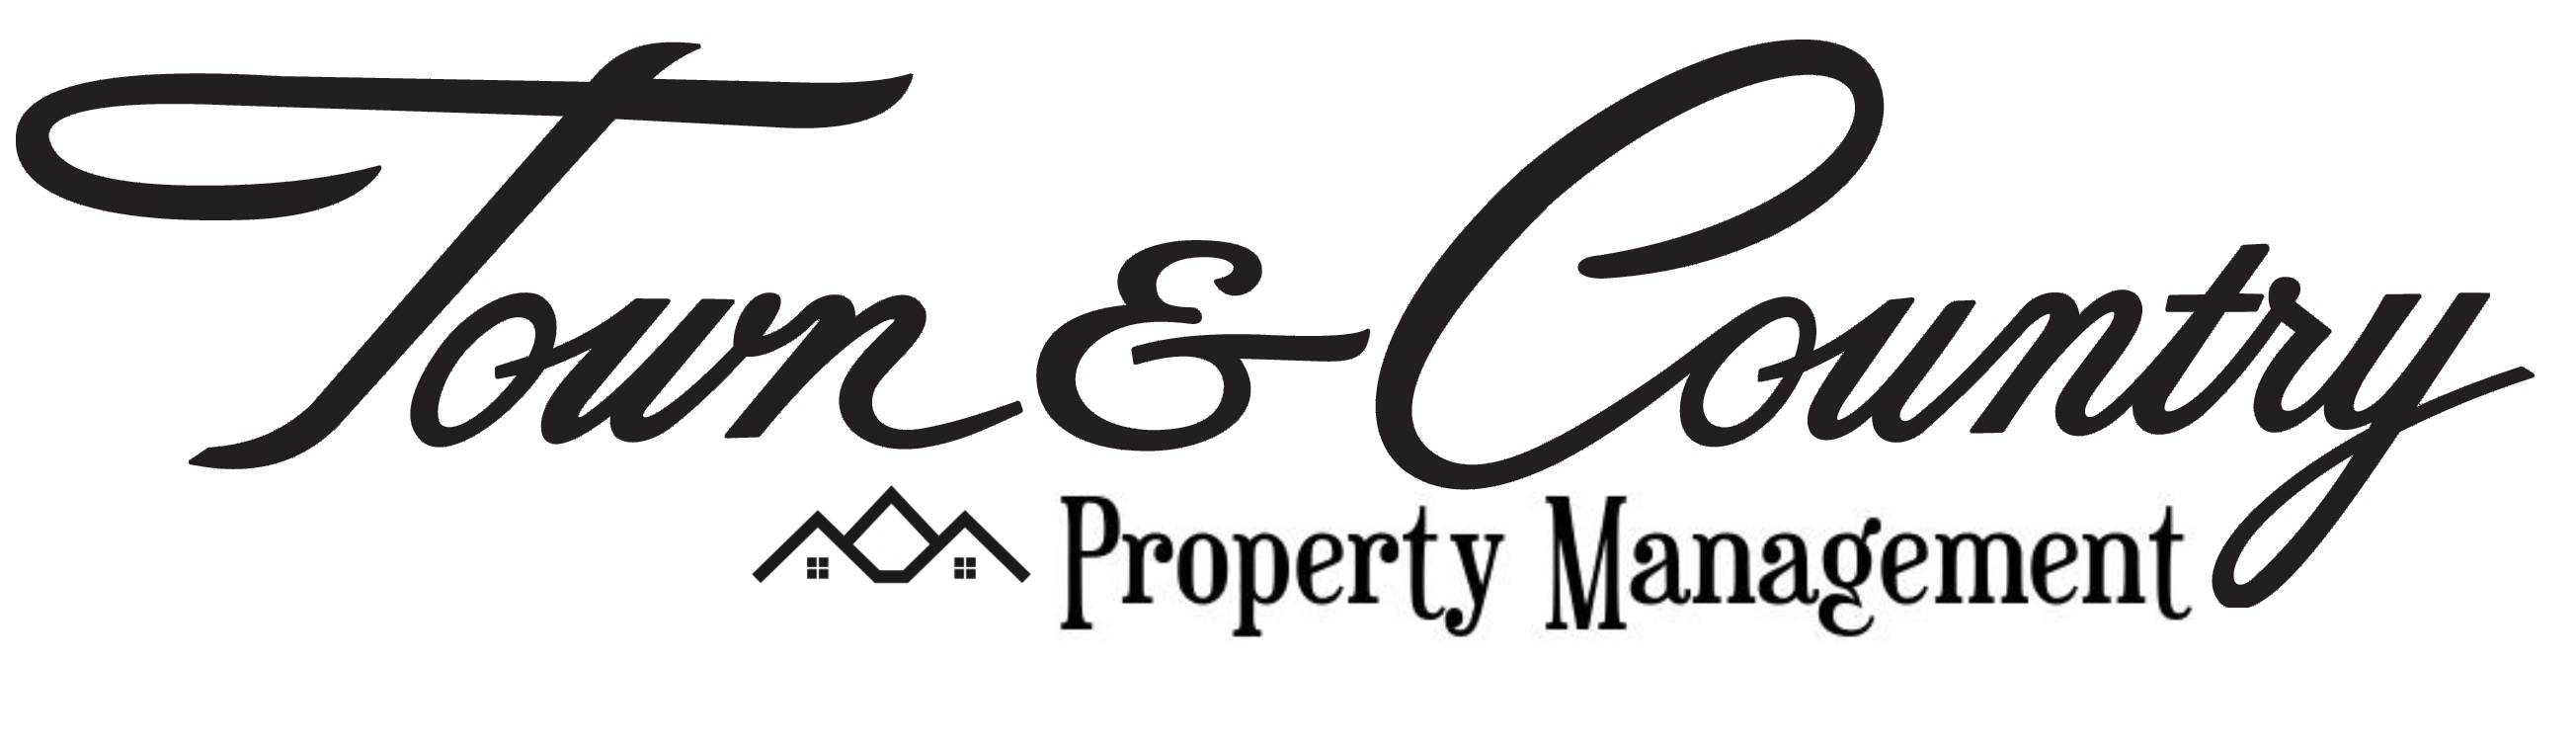 Town and Country Property Management